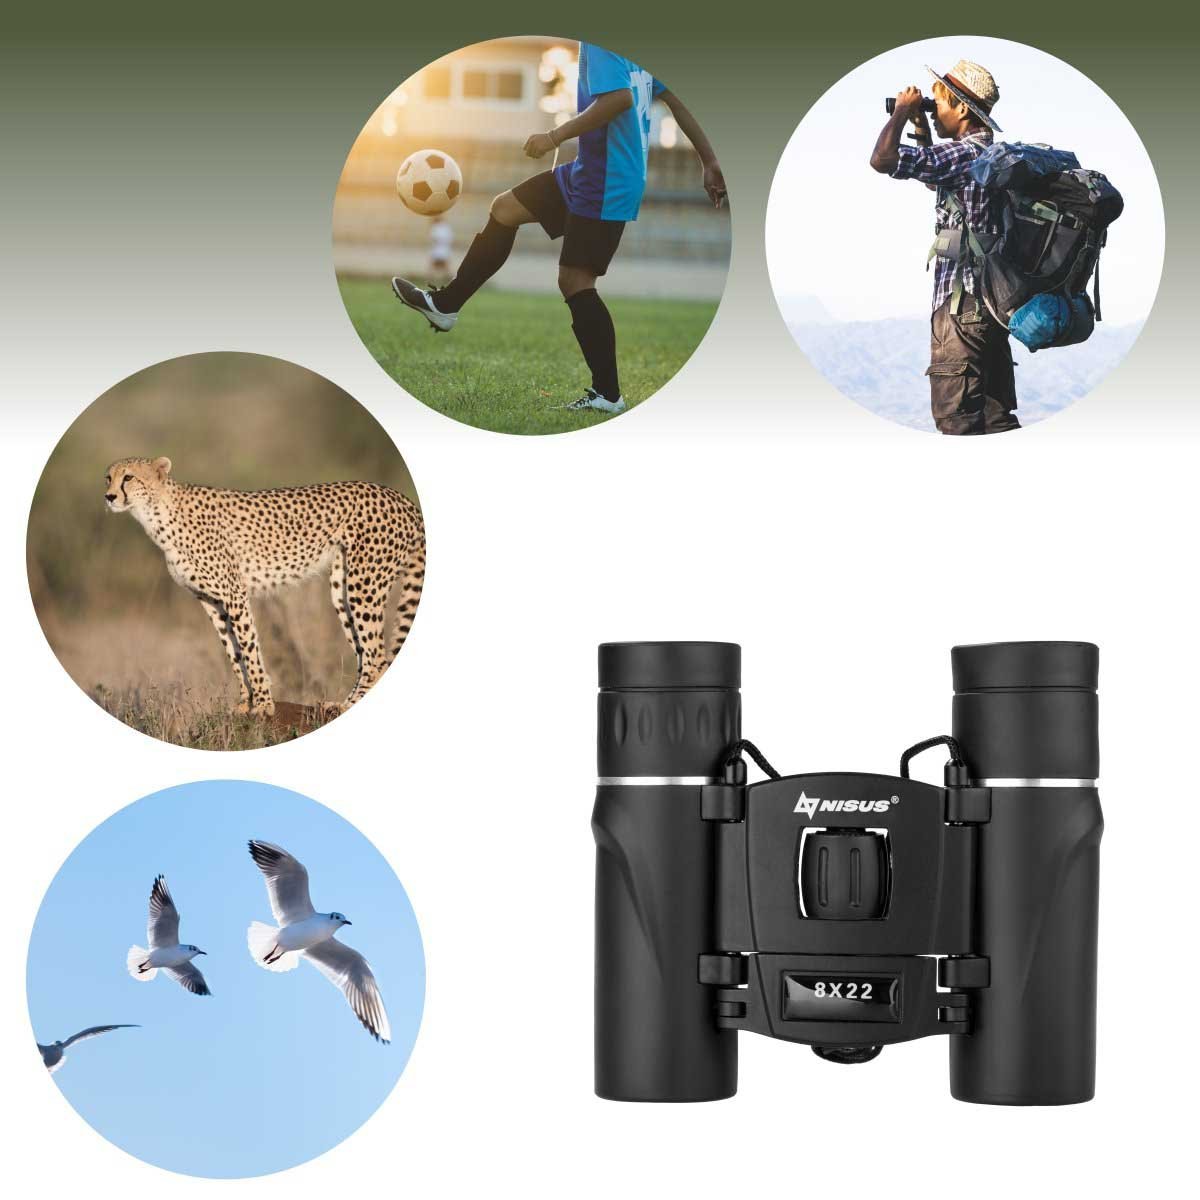 8x22 Compact Lightweight Binocular for Backpacking could be used to explore the distant world around you